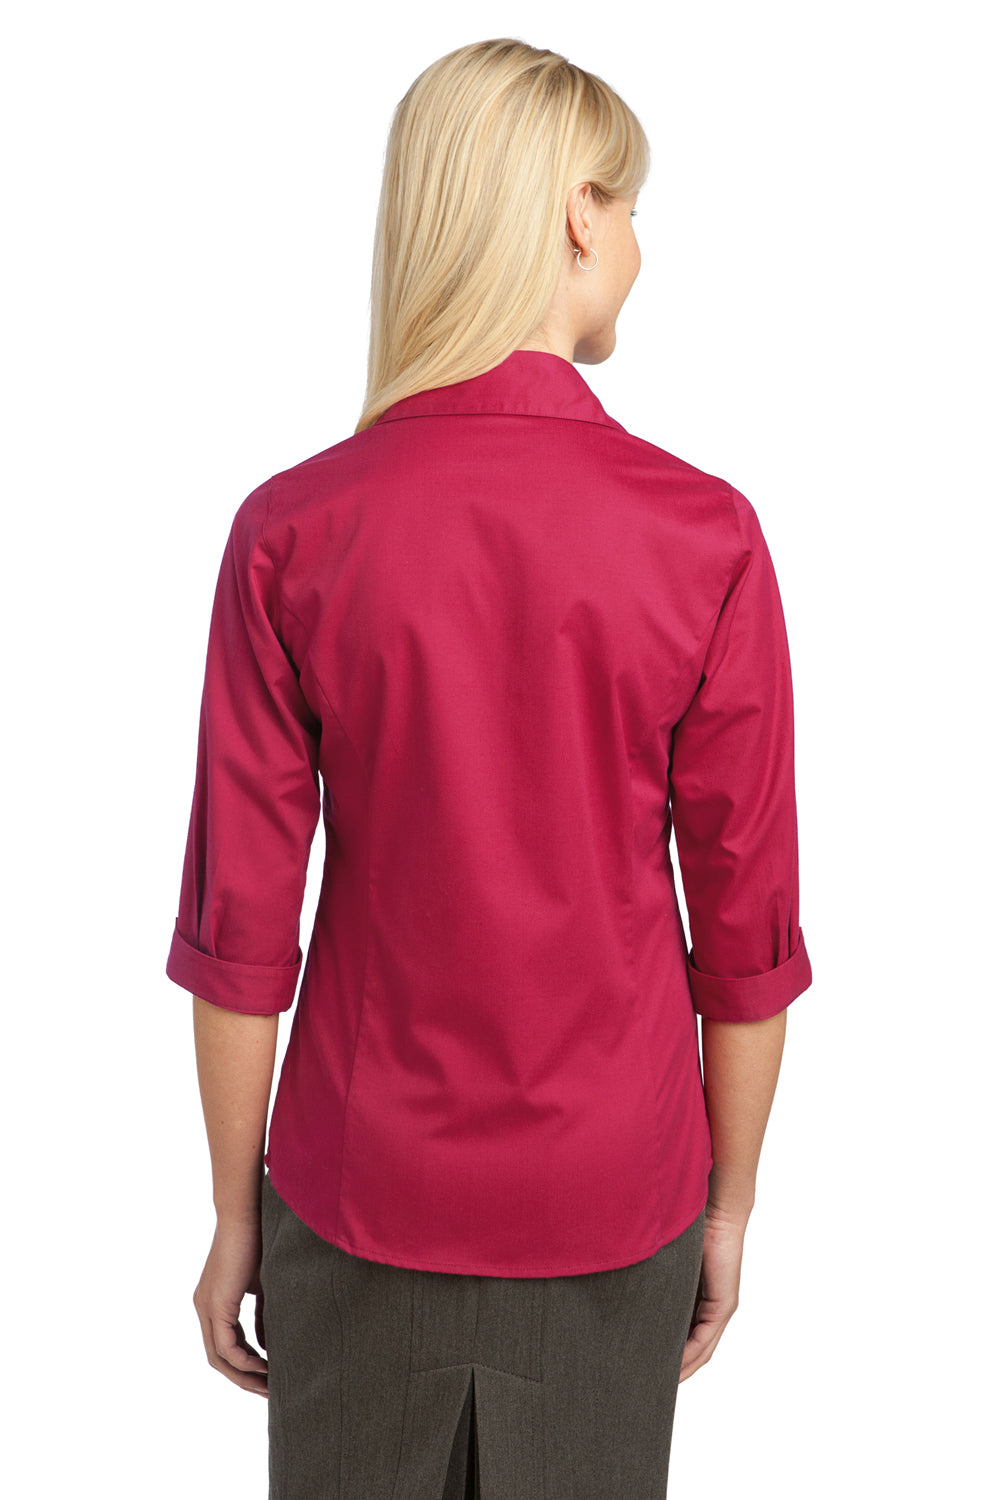 Port Authority L6290 Womens Wrinkle Resistant 3/4 Sleeve Button Down Shirt Raspberry Pink Back